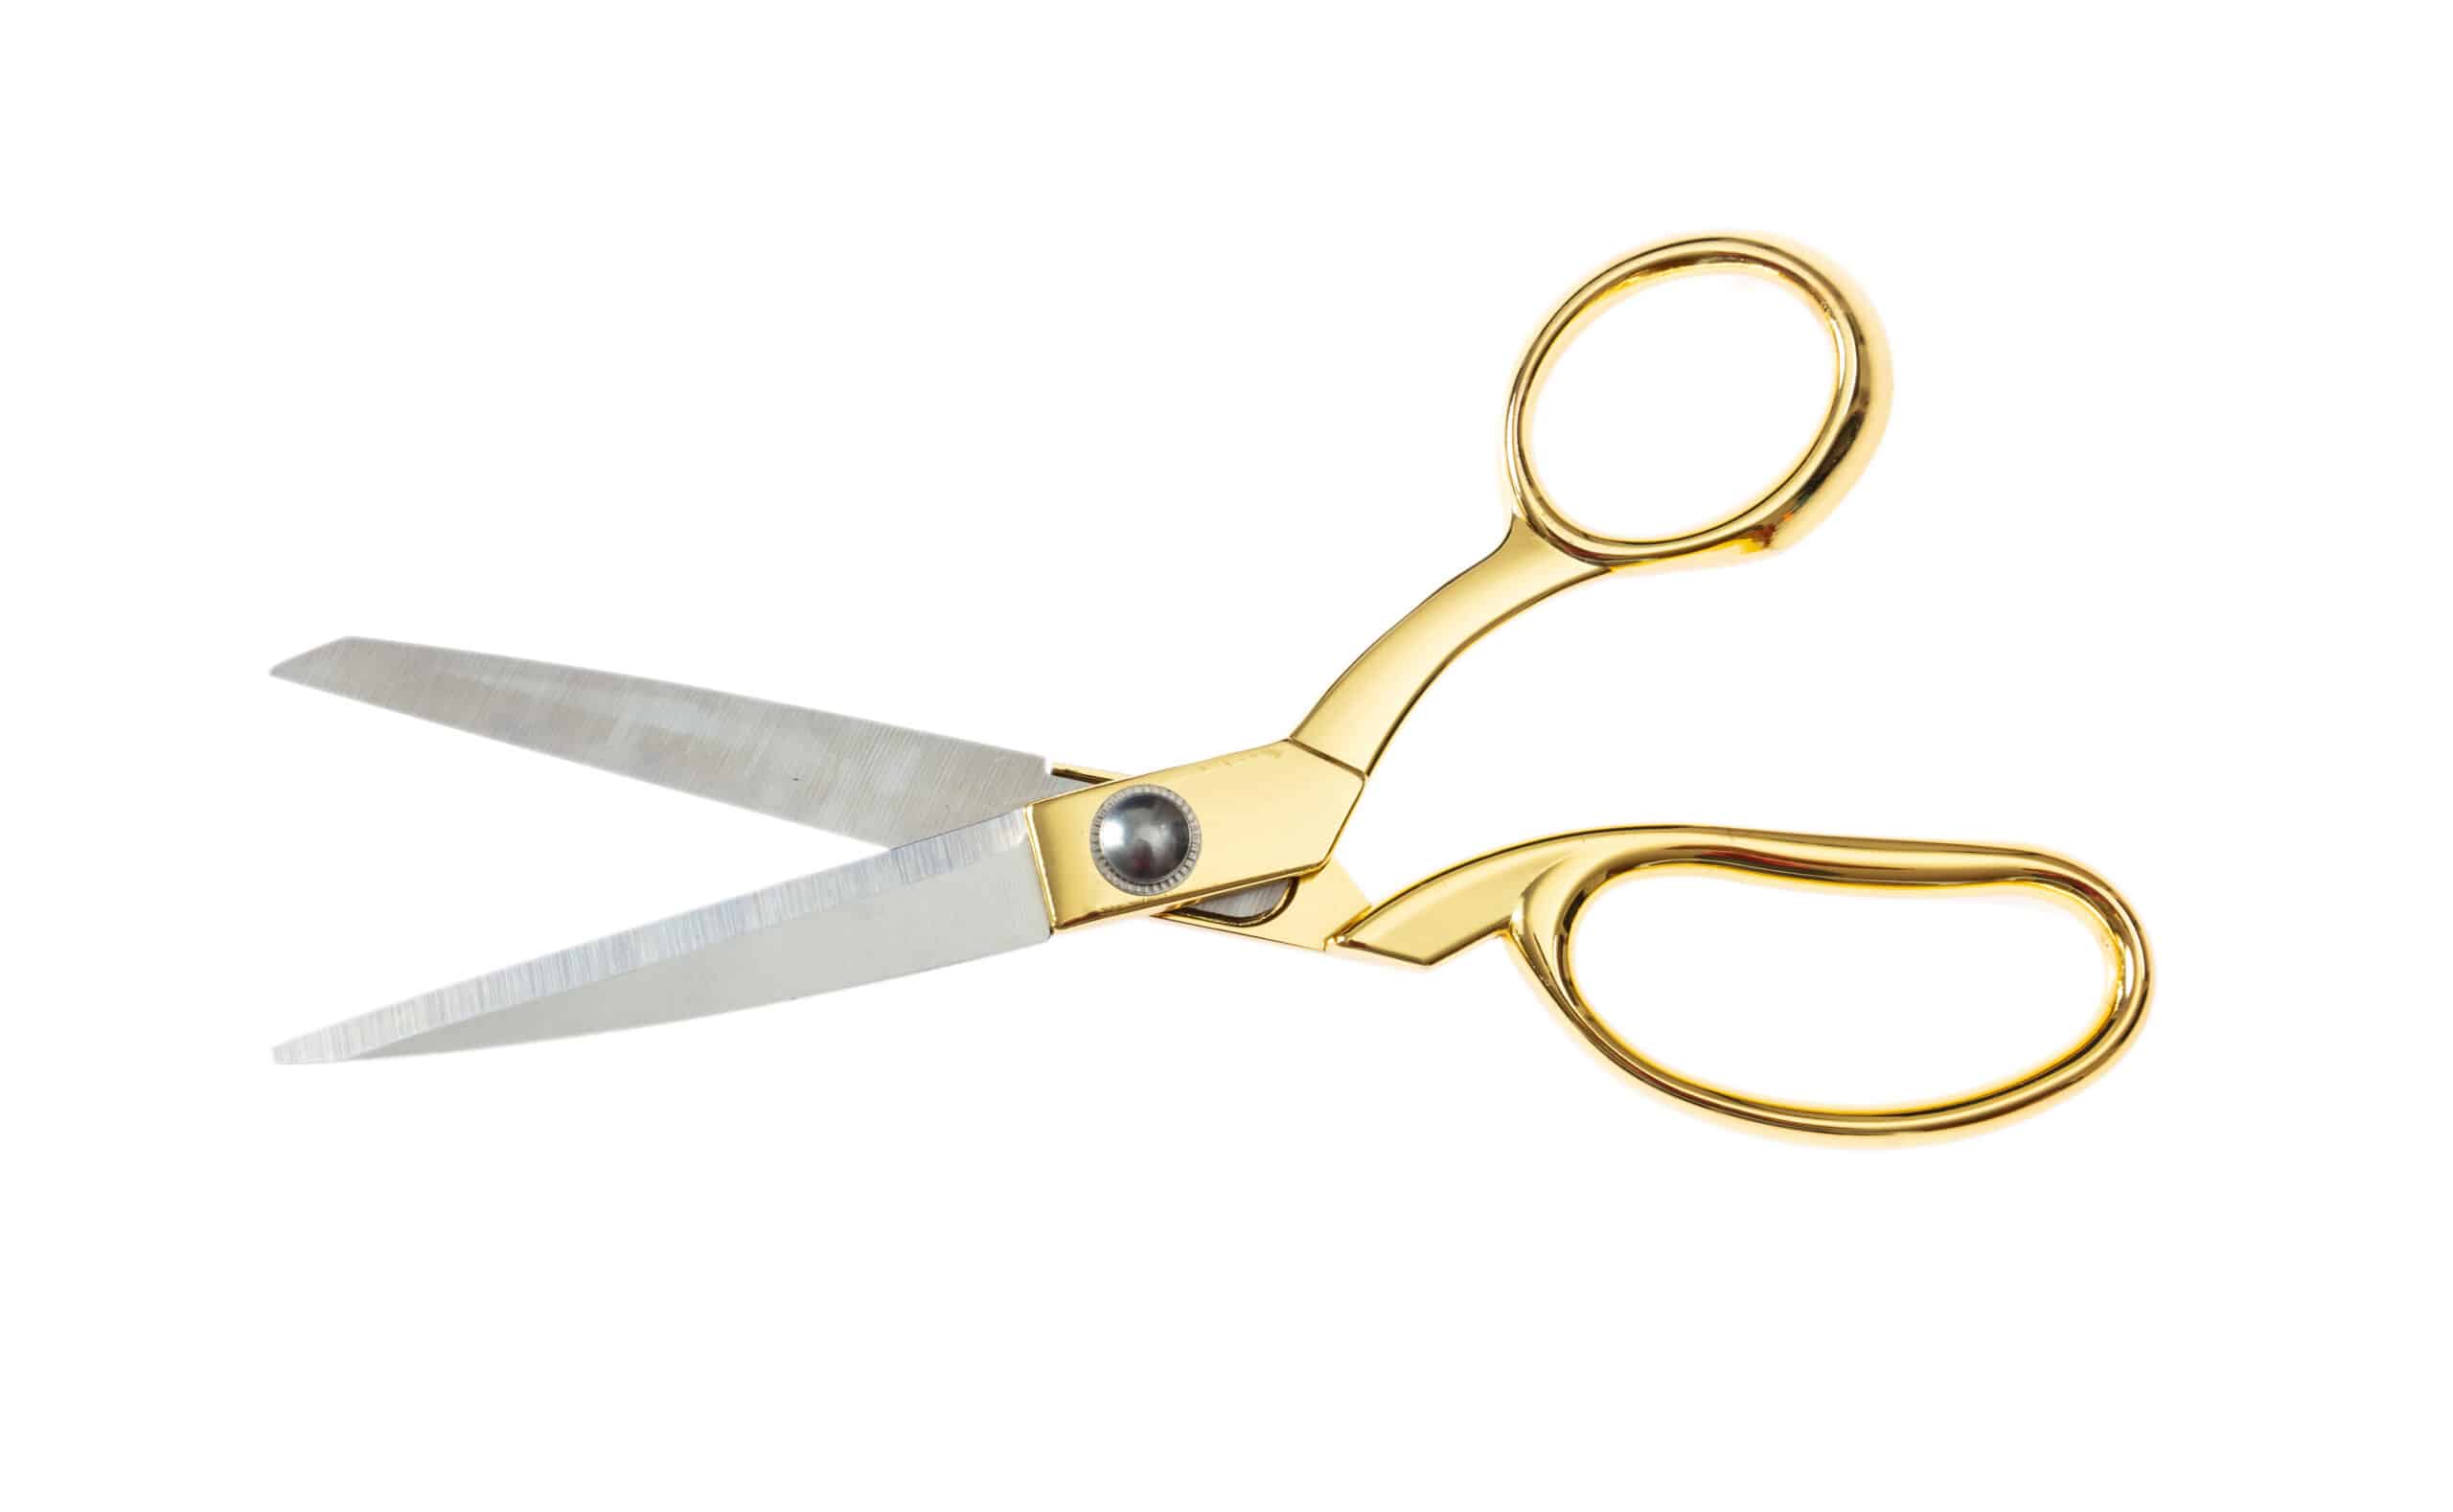 Can You Bring Small Scissors On A Plane?